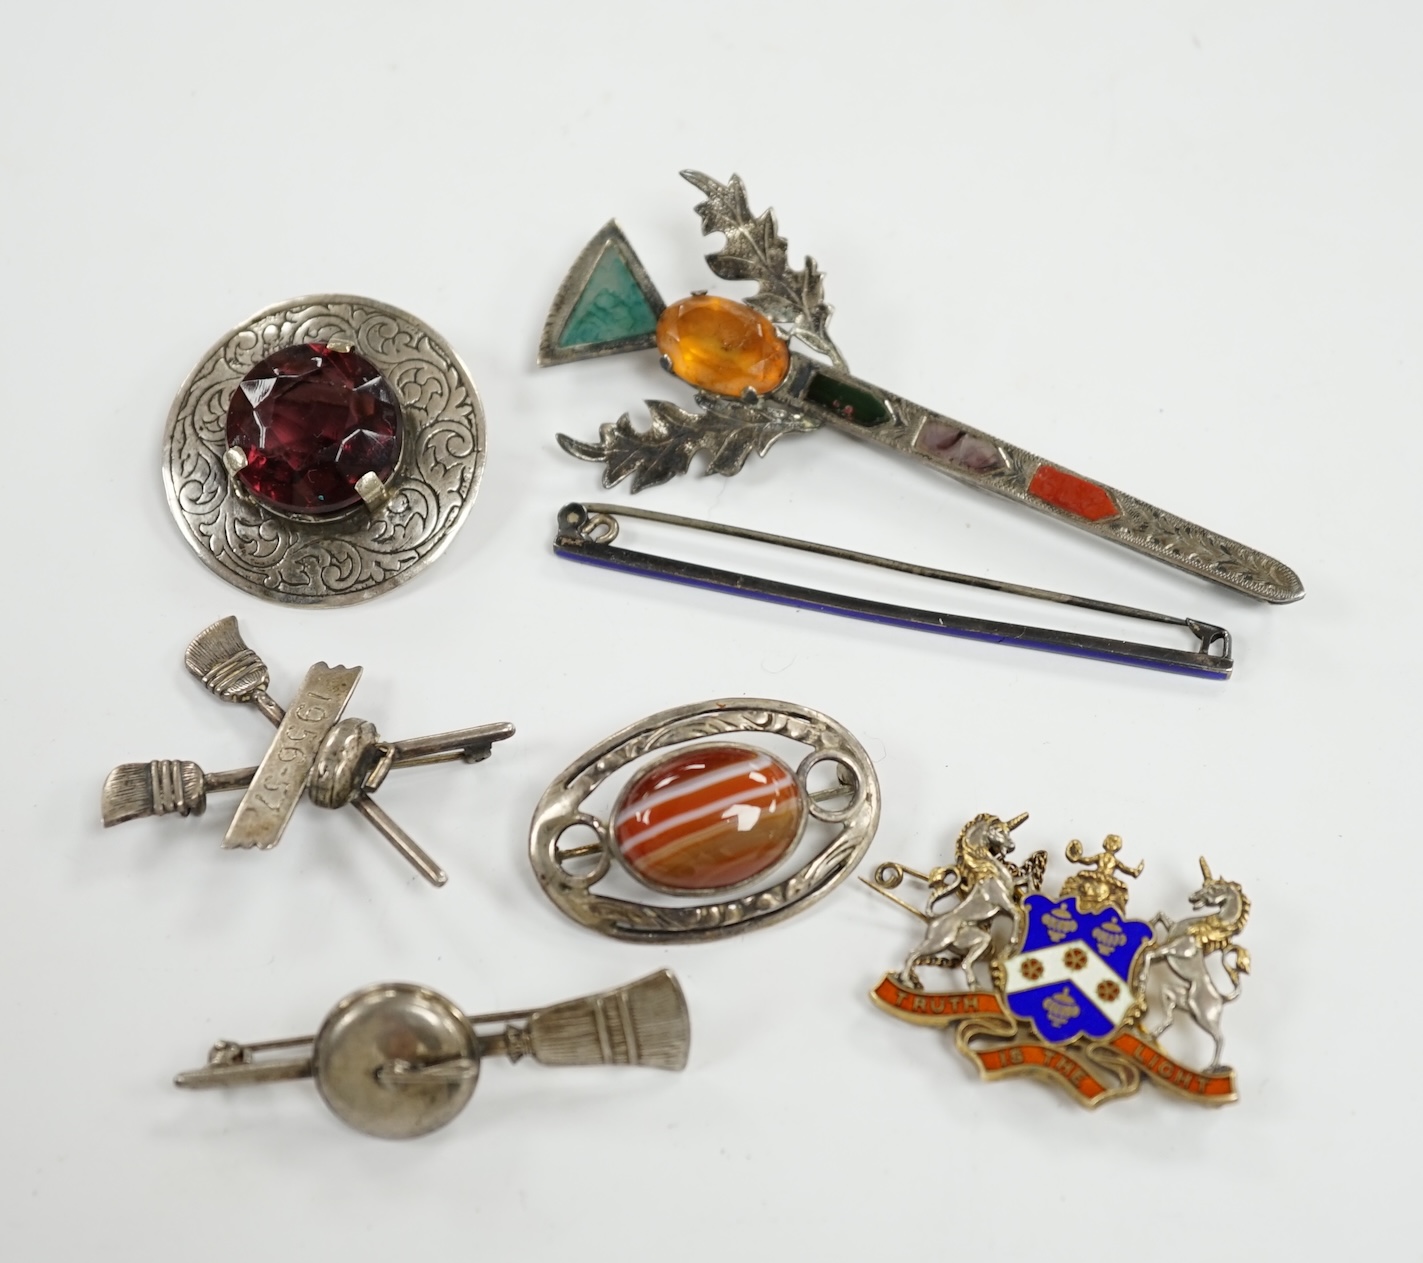 A 1950's Scottish silver, gem and Scottish hardstone set brooch, 91mm, together with six other brooches including four sterling and one silver. Condition - fair